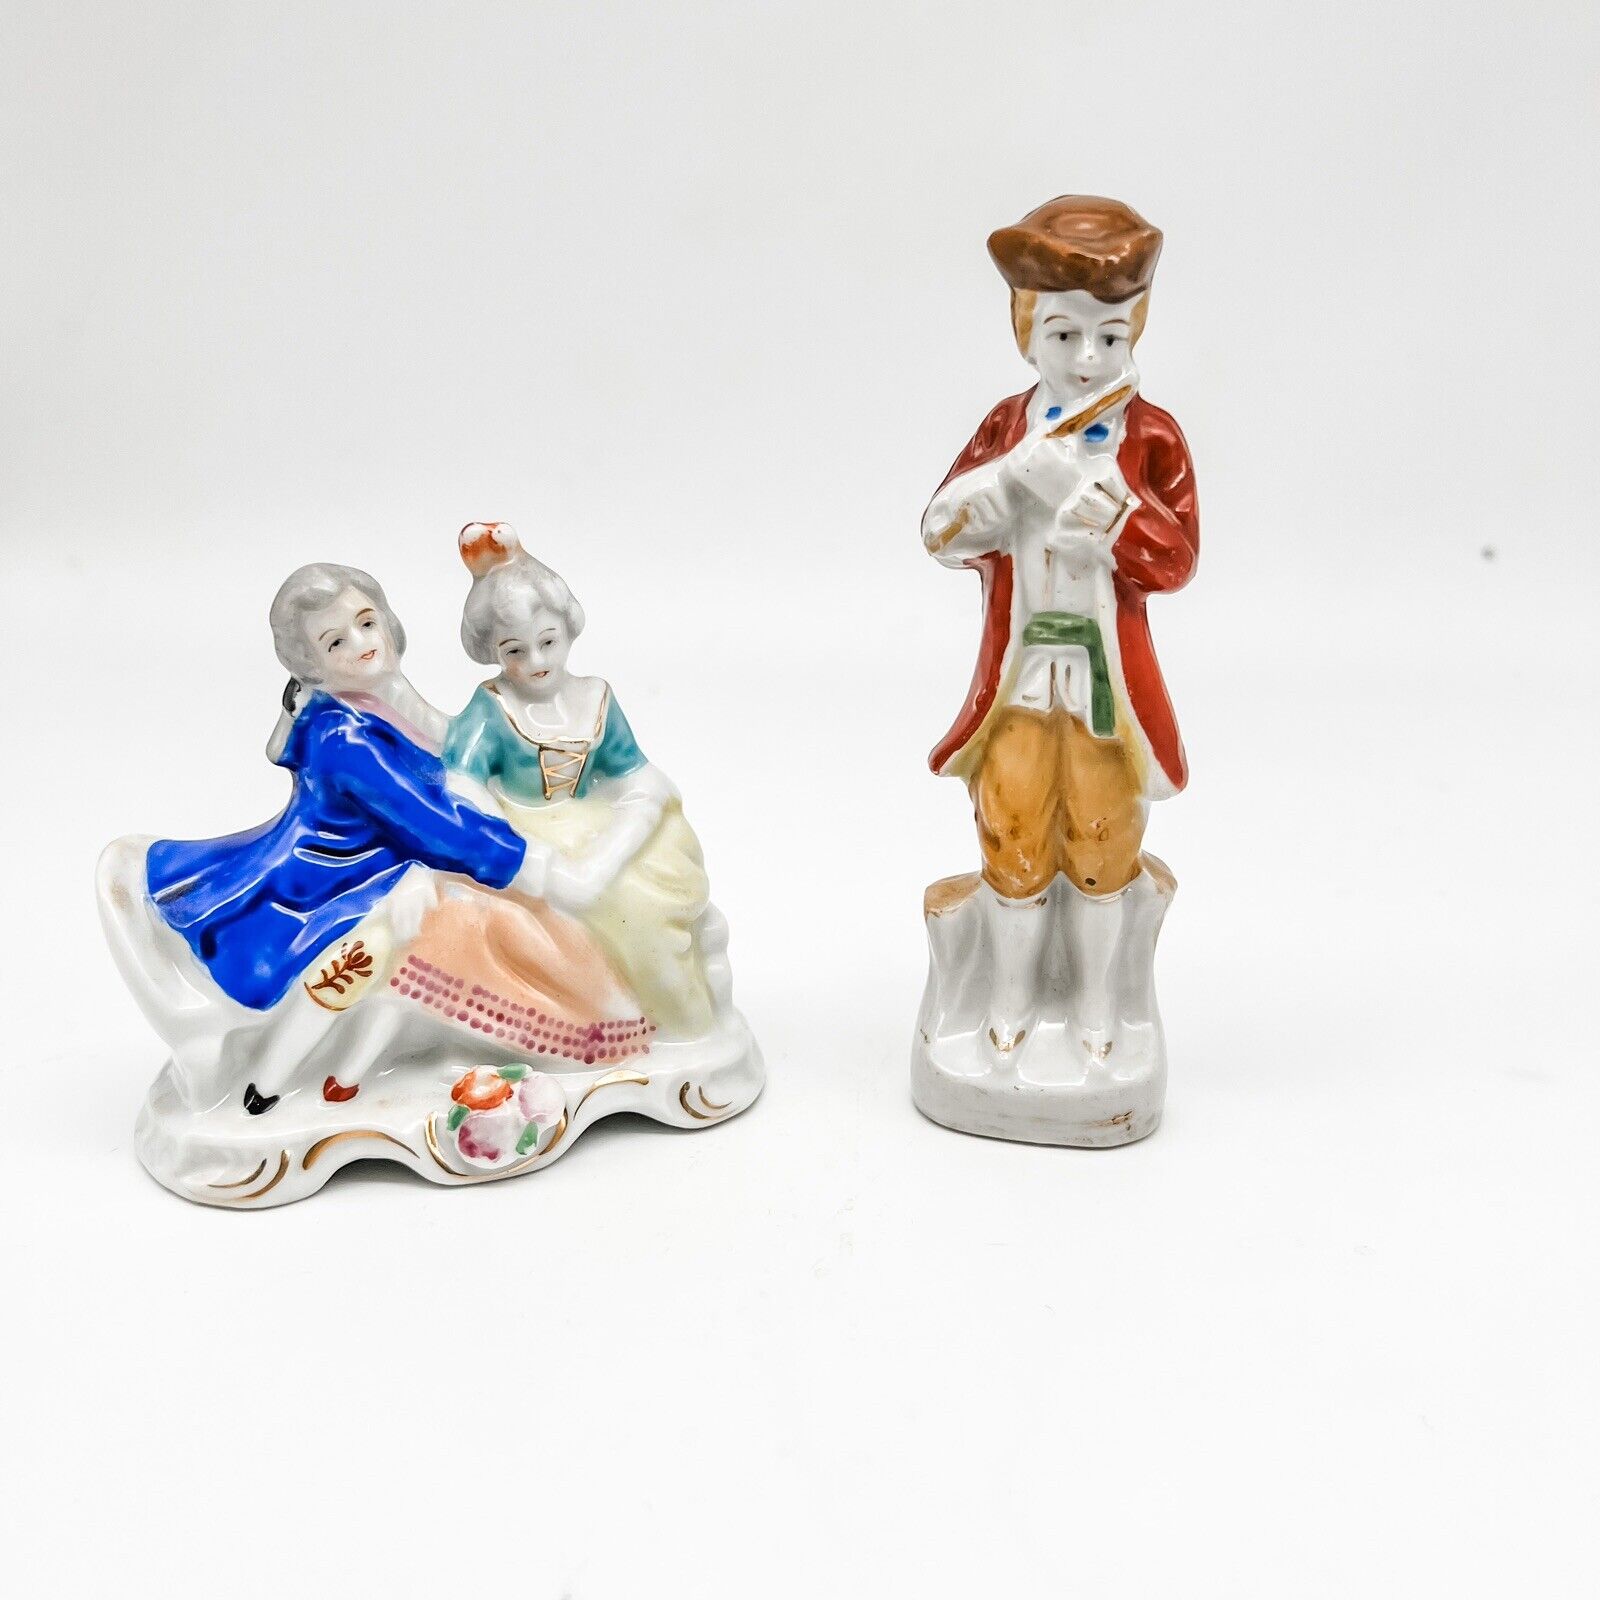 Figurines Made in Occupied Japan/Courting Couple/Musician/18th c. British dress